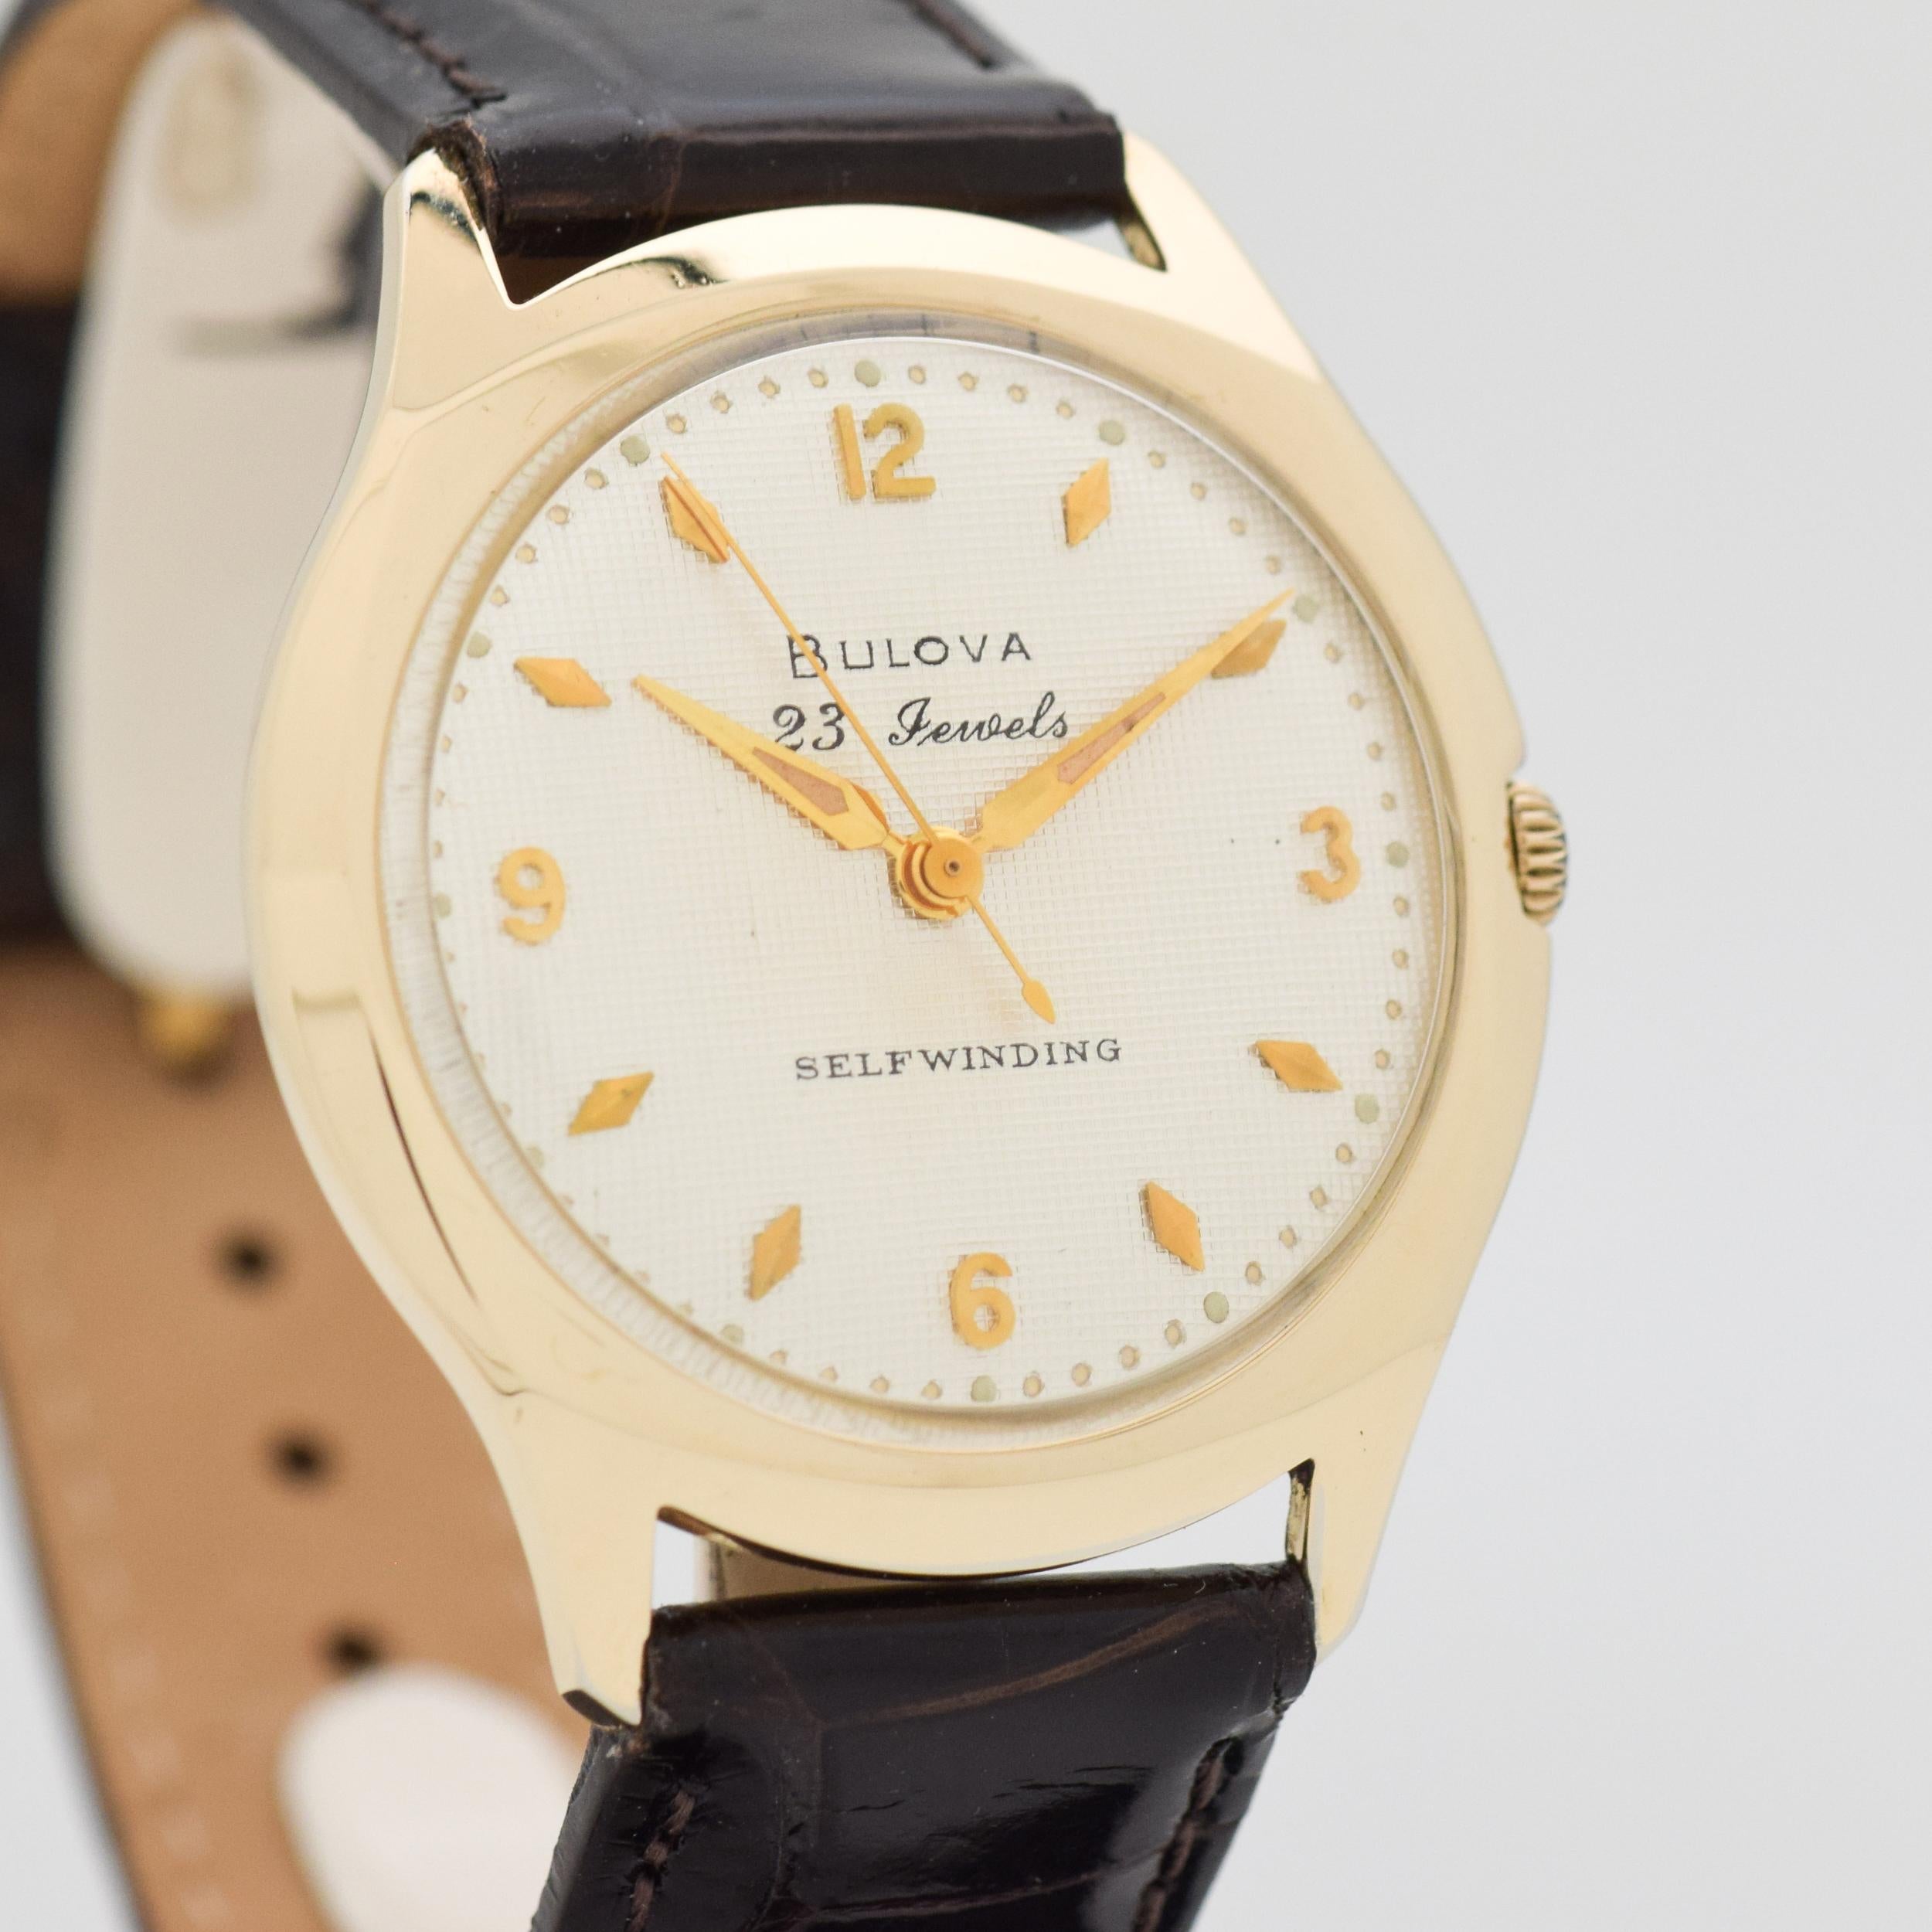 1959 Vintage Bulova 10k Yellow Gold Filled Automatic watch with Original Waffle Textured Silver Dial with Applied Gold Color Arabic 3, 6, 9, and 12 with Beveled Elongate Diamond Shaped Markers. Case size, 34mm wide. 23 jewel, automatic caliber